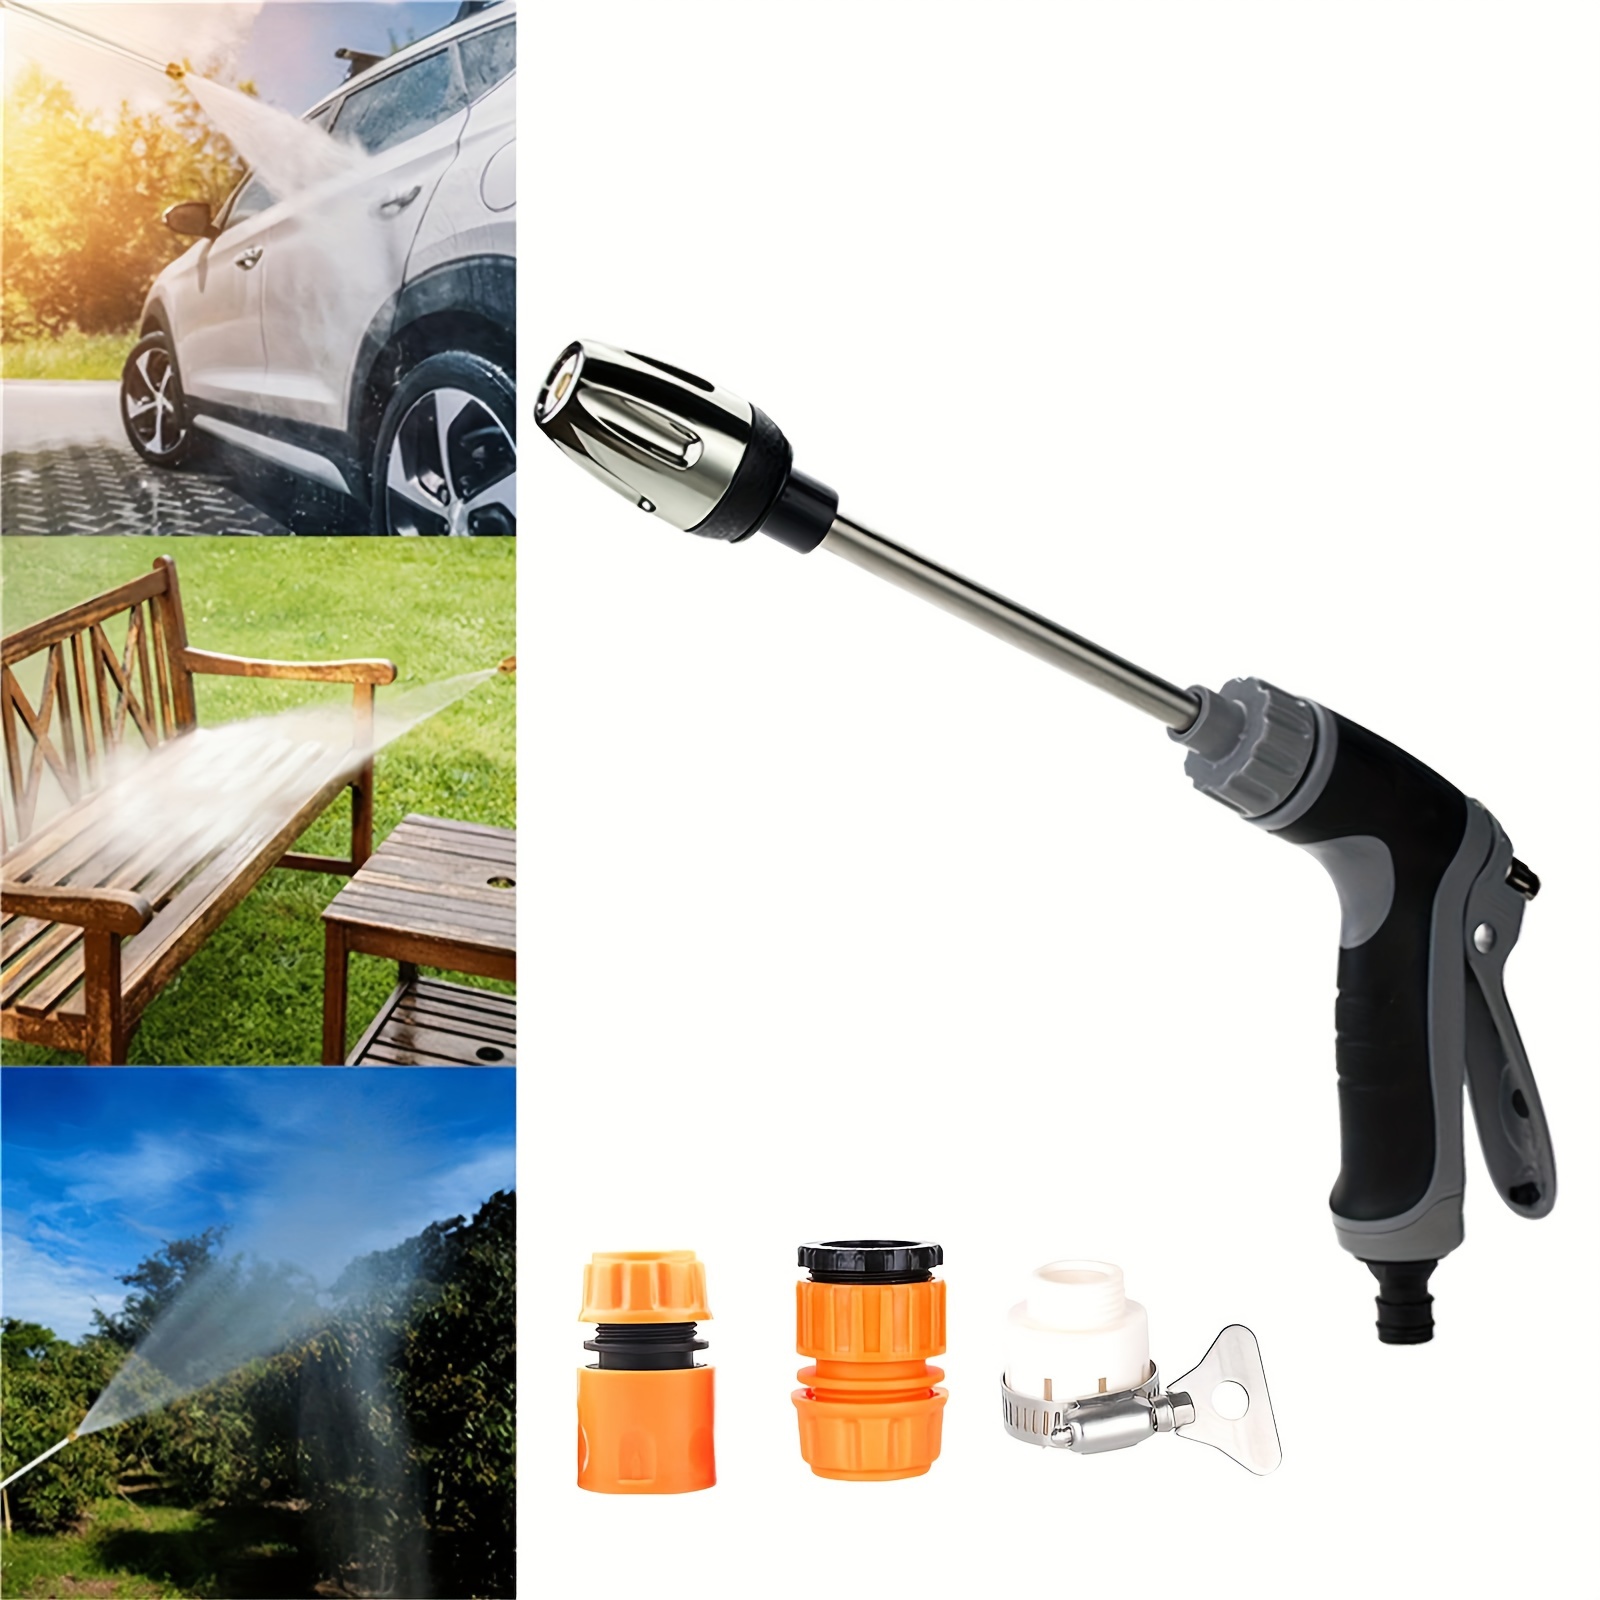 

Turbowasher - Power High-pressure Cleaner For Garden Hoses, With Accessories, Suitable For 1/2" Pipe - 1 Pcs